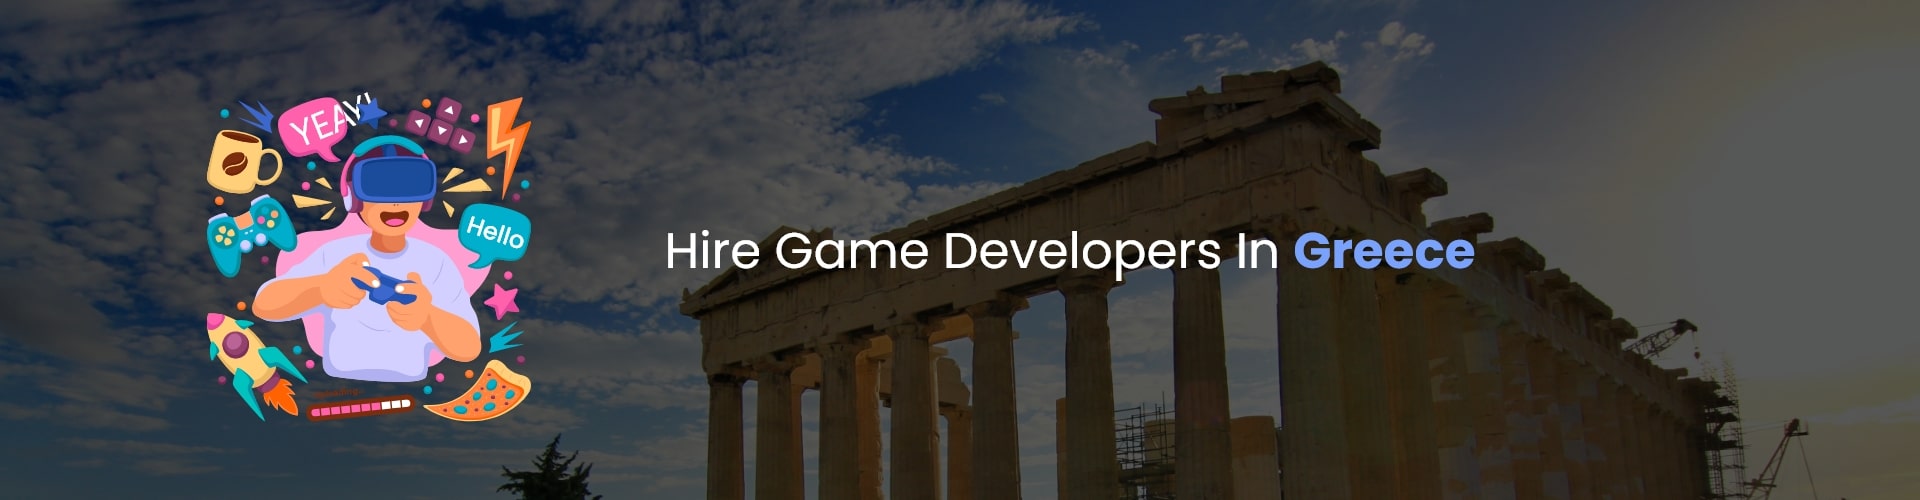 hire game developers in greece